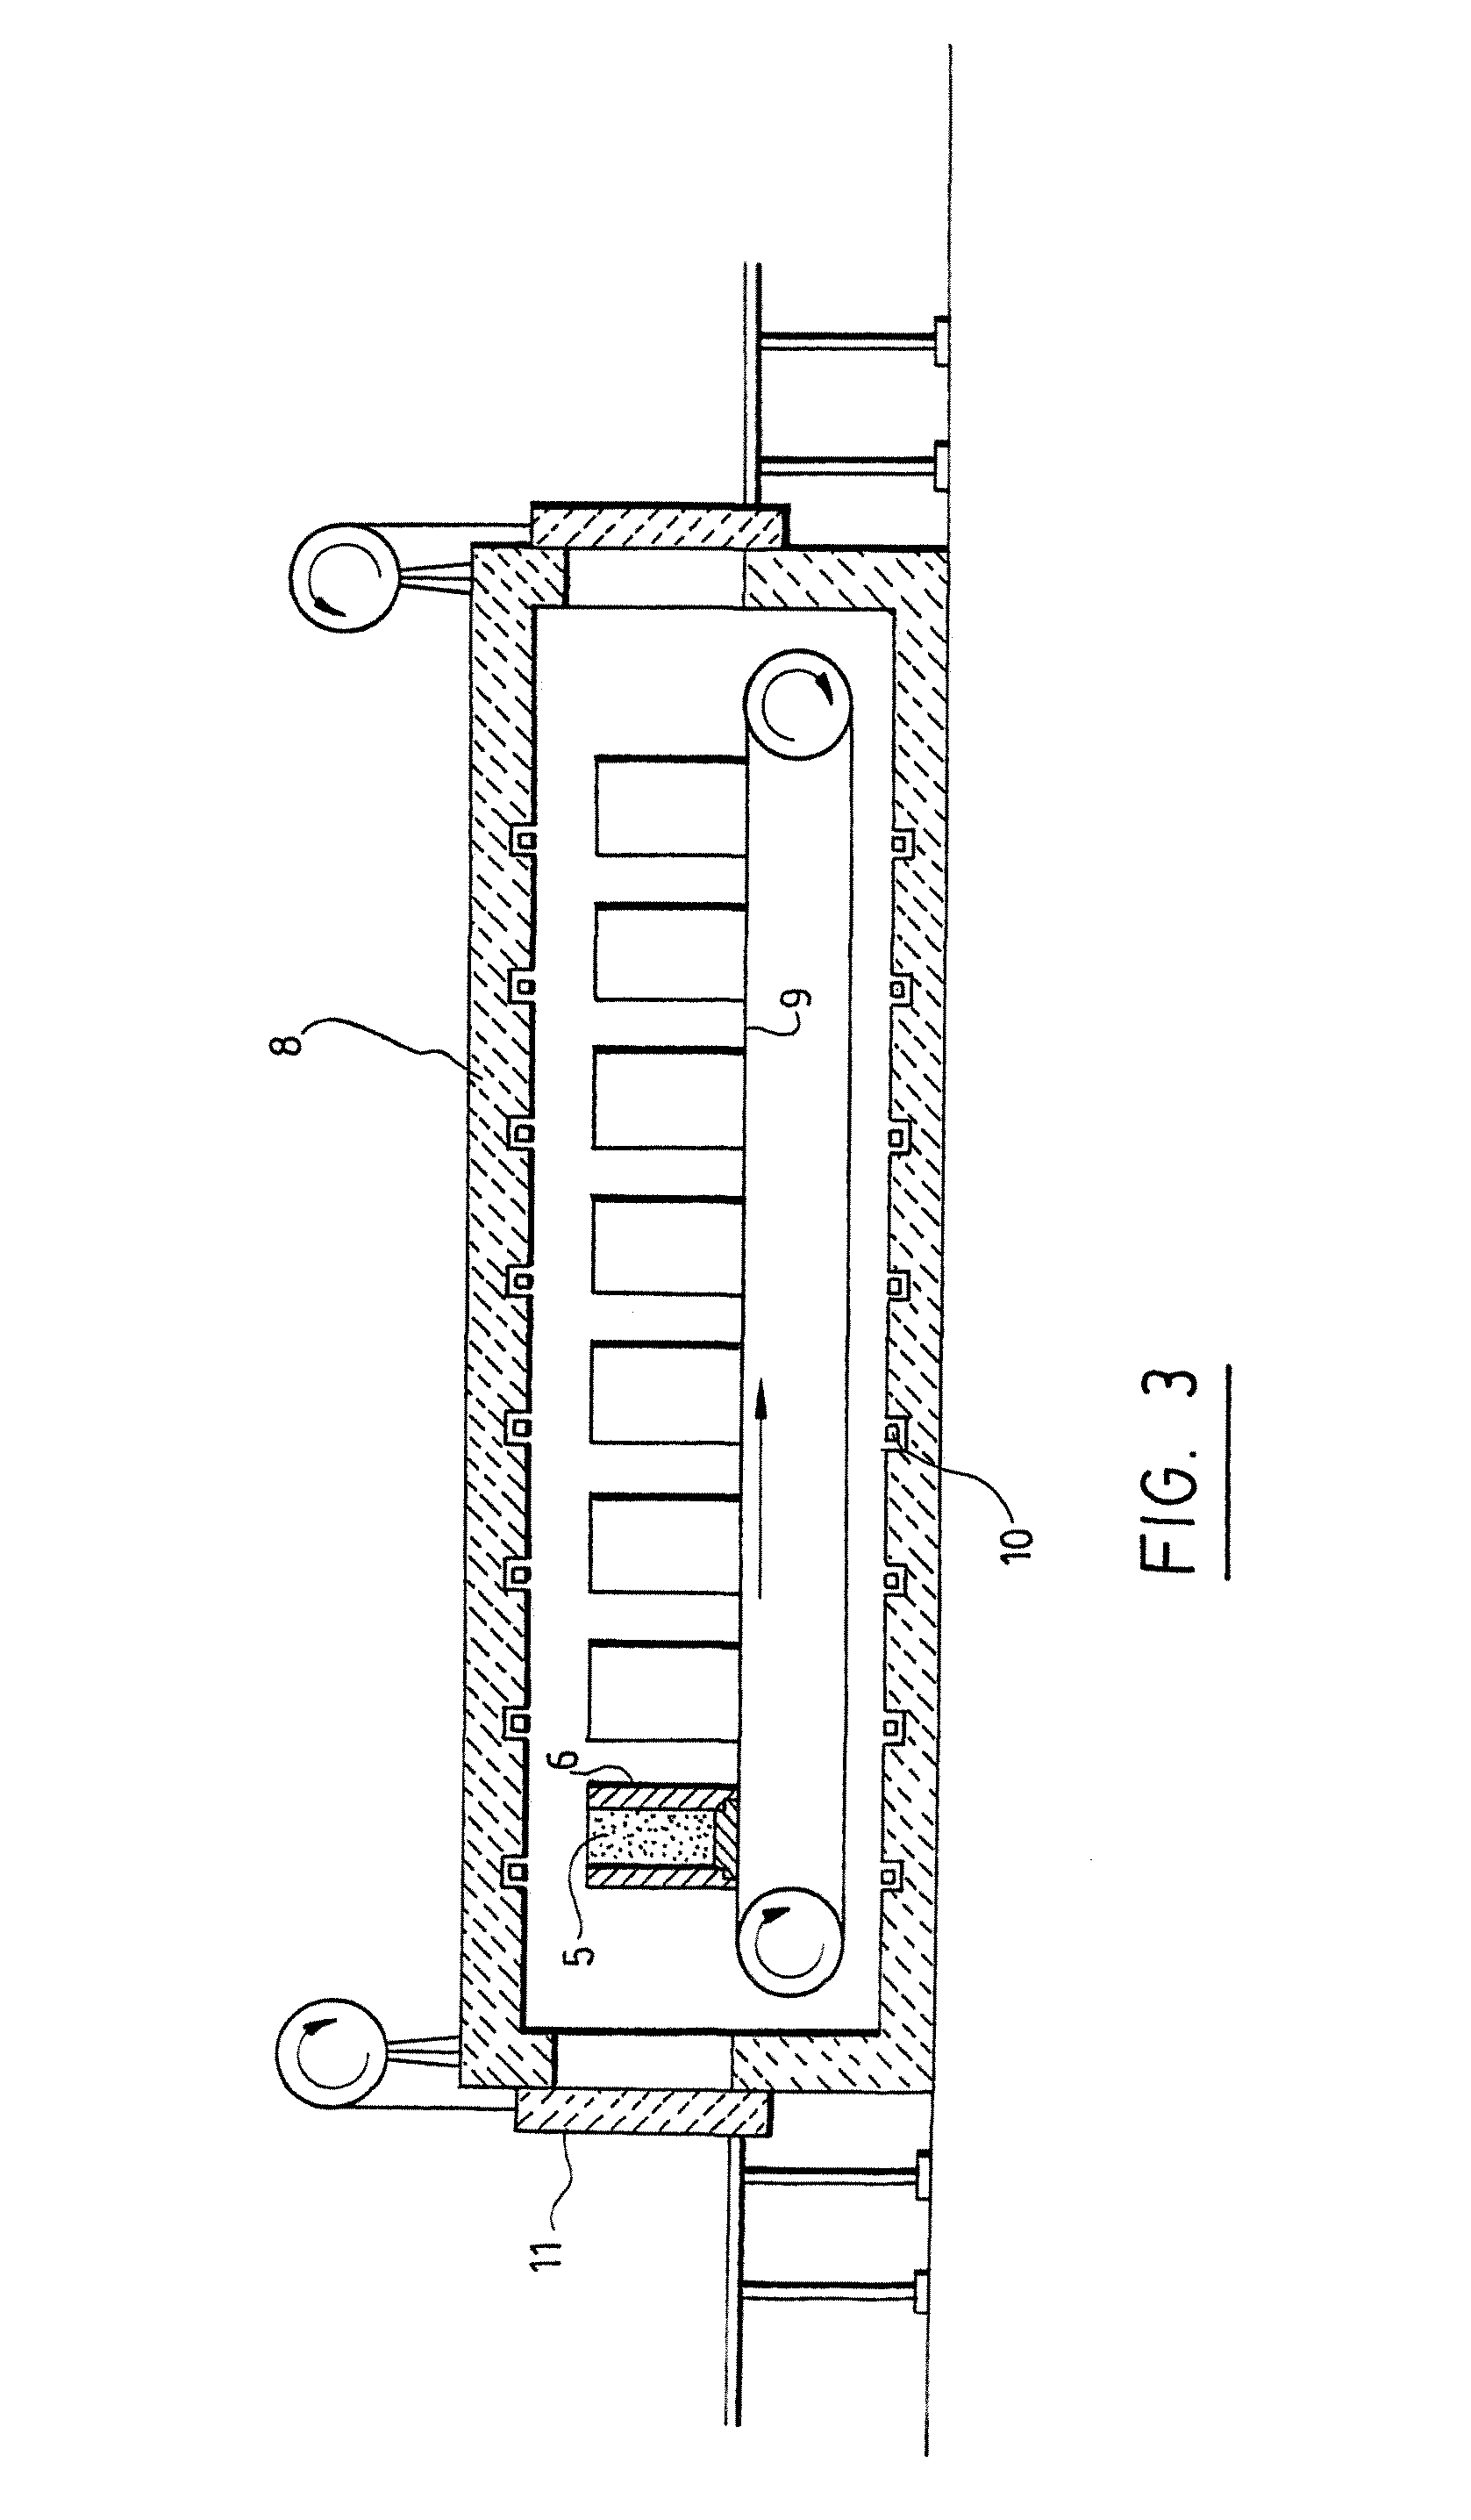 Method for production of metal foam or metal-composite bodies